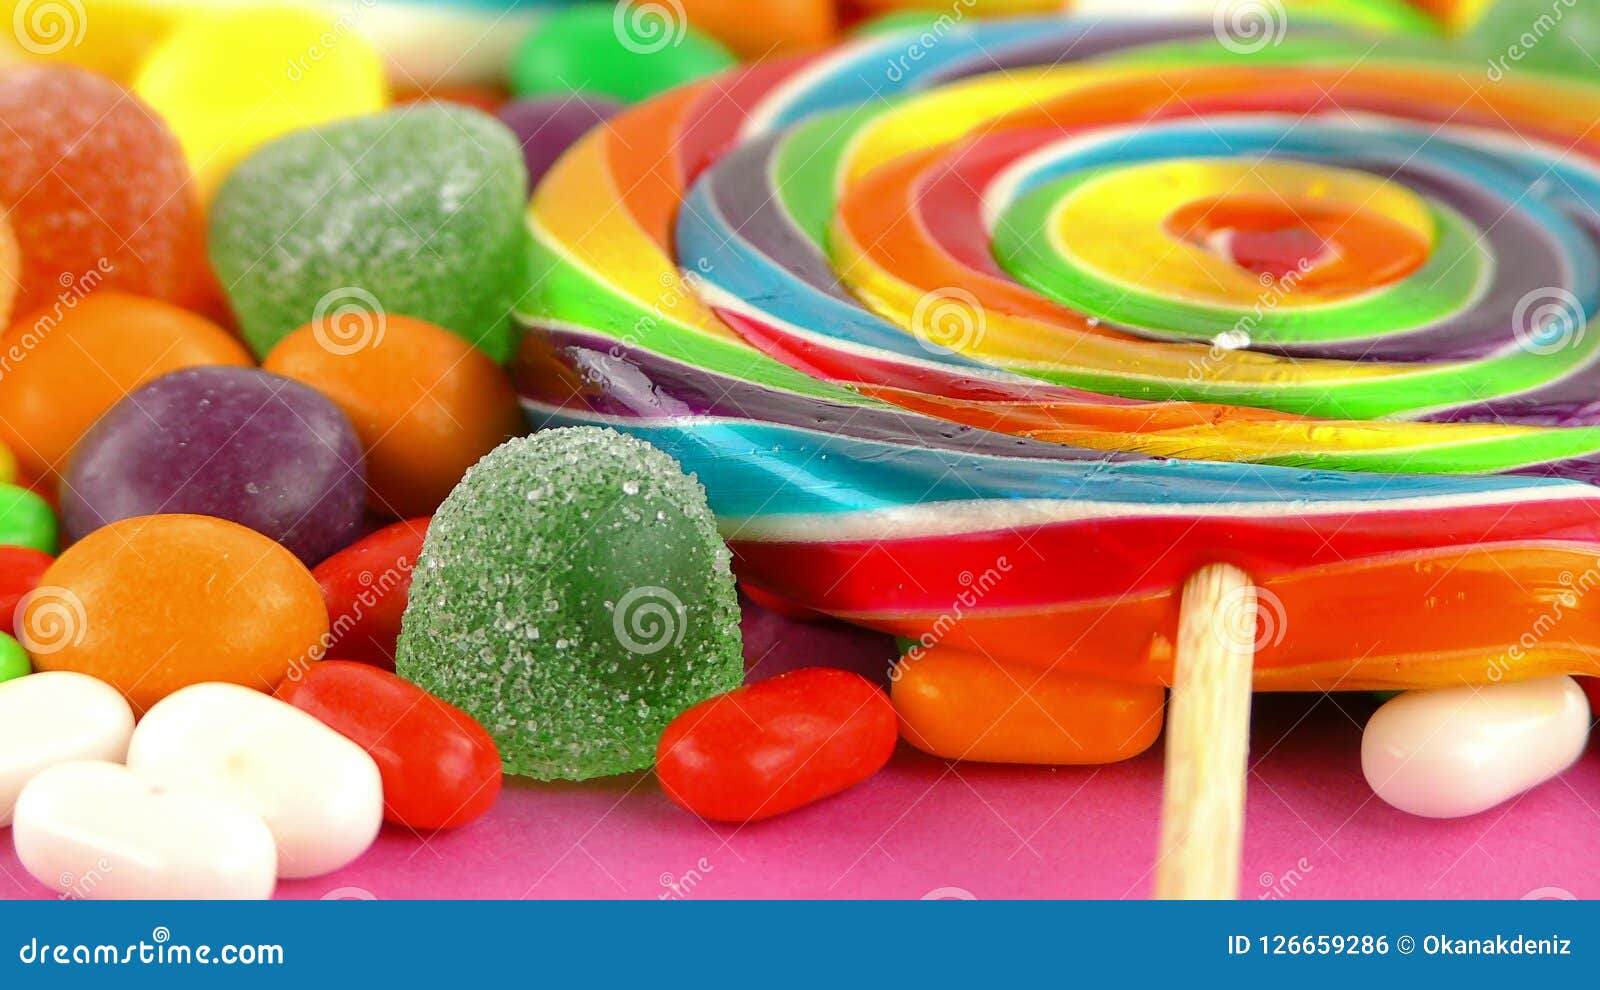 Candy Sweet Jelly Lolly and Delicious Sugar Dessert Stock Photo - Image ...